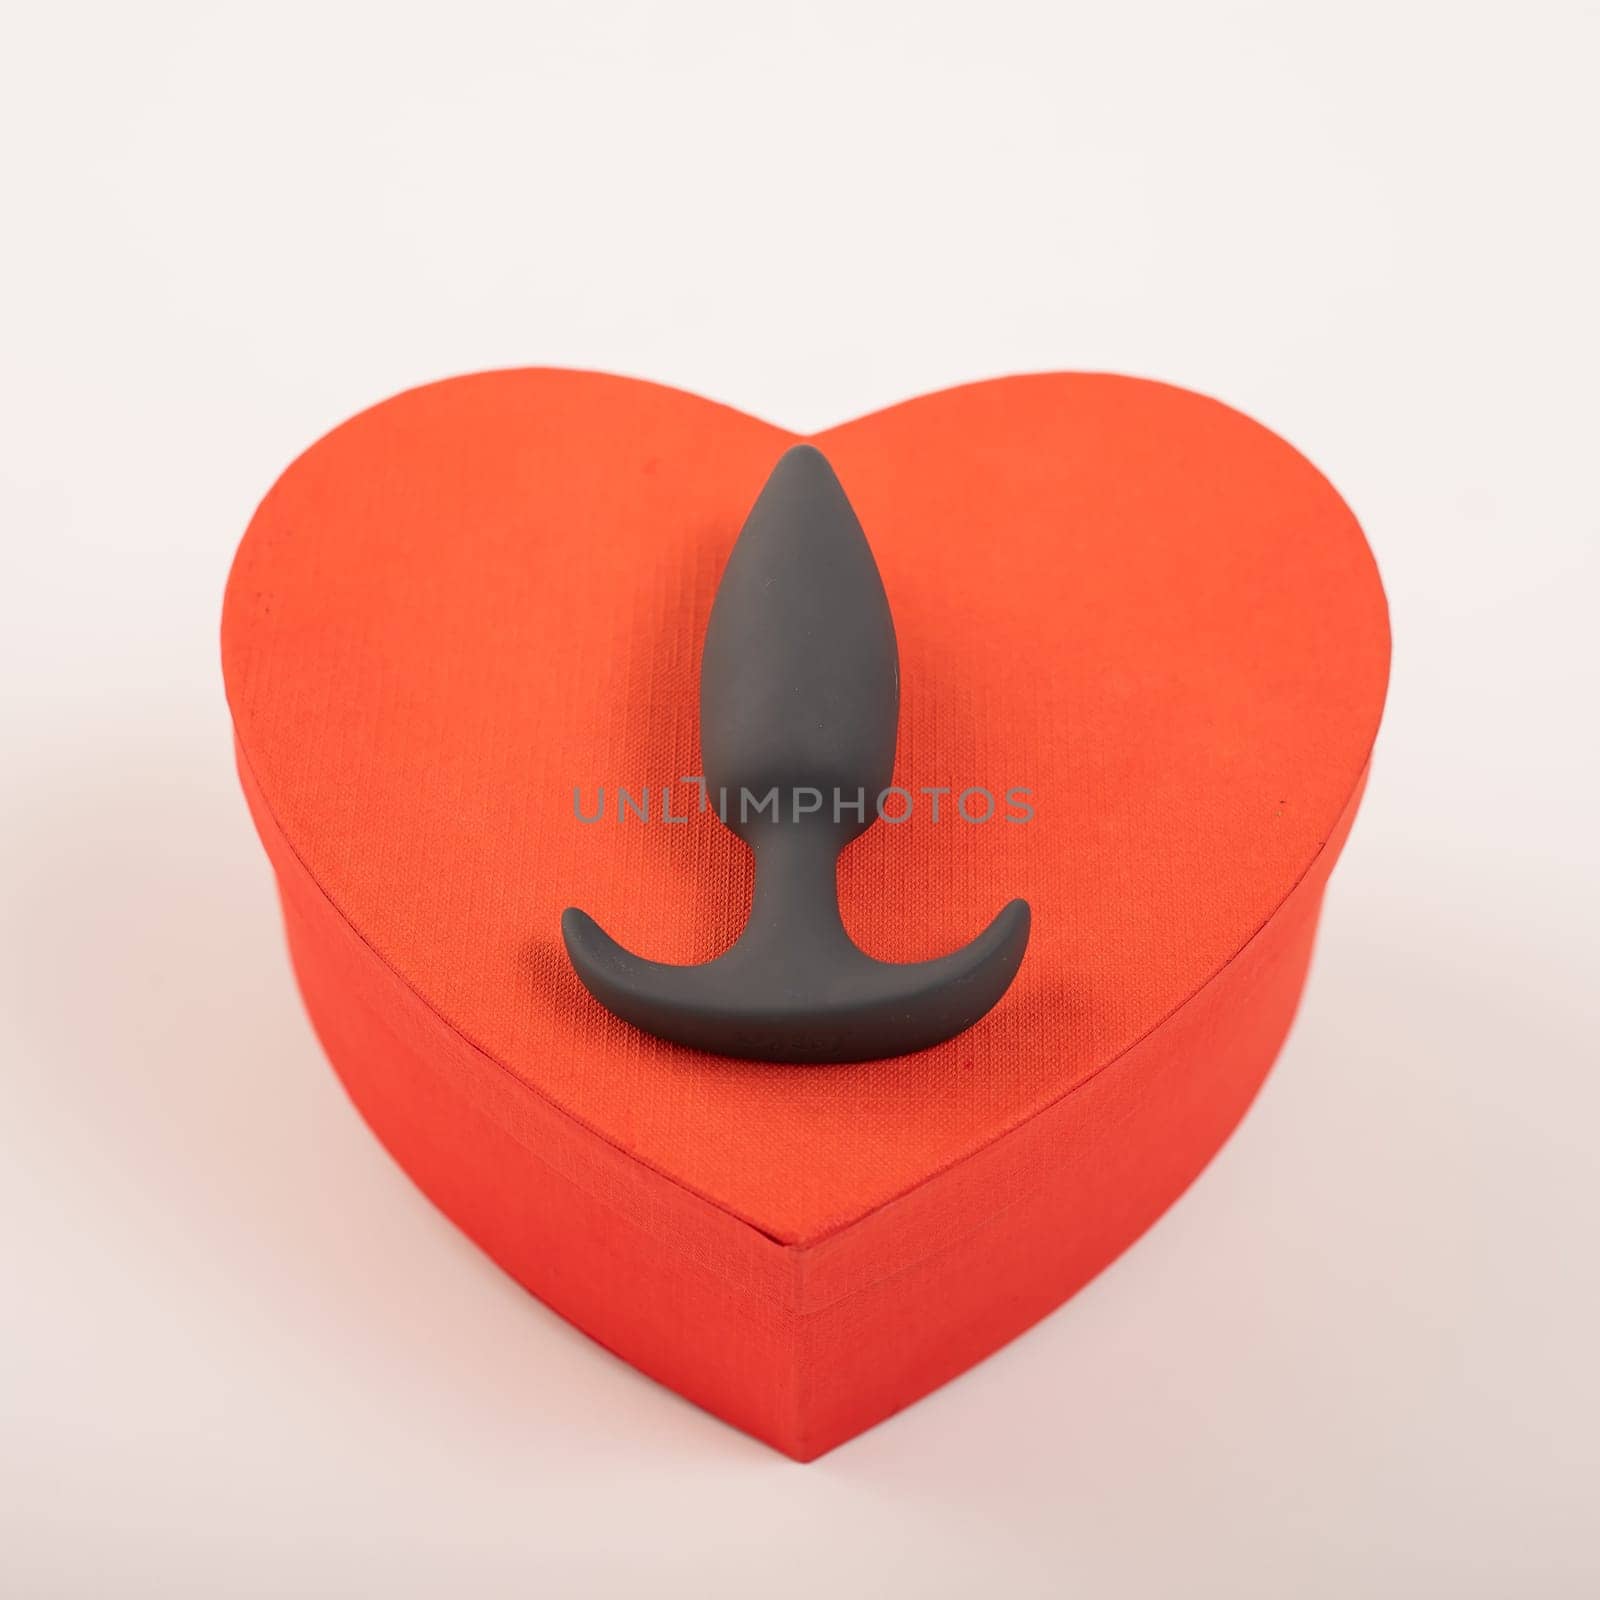 Heart-shaped box and butt plug on a white background. Love on February 14